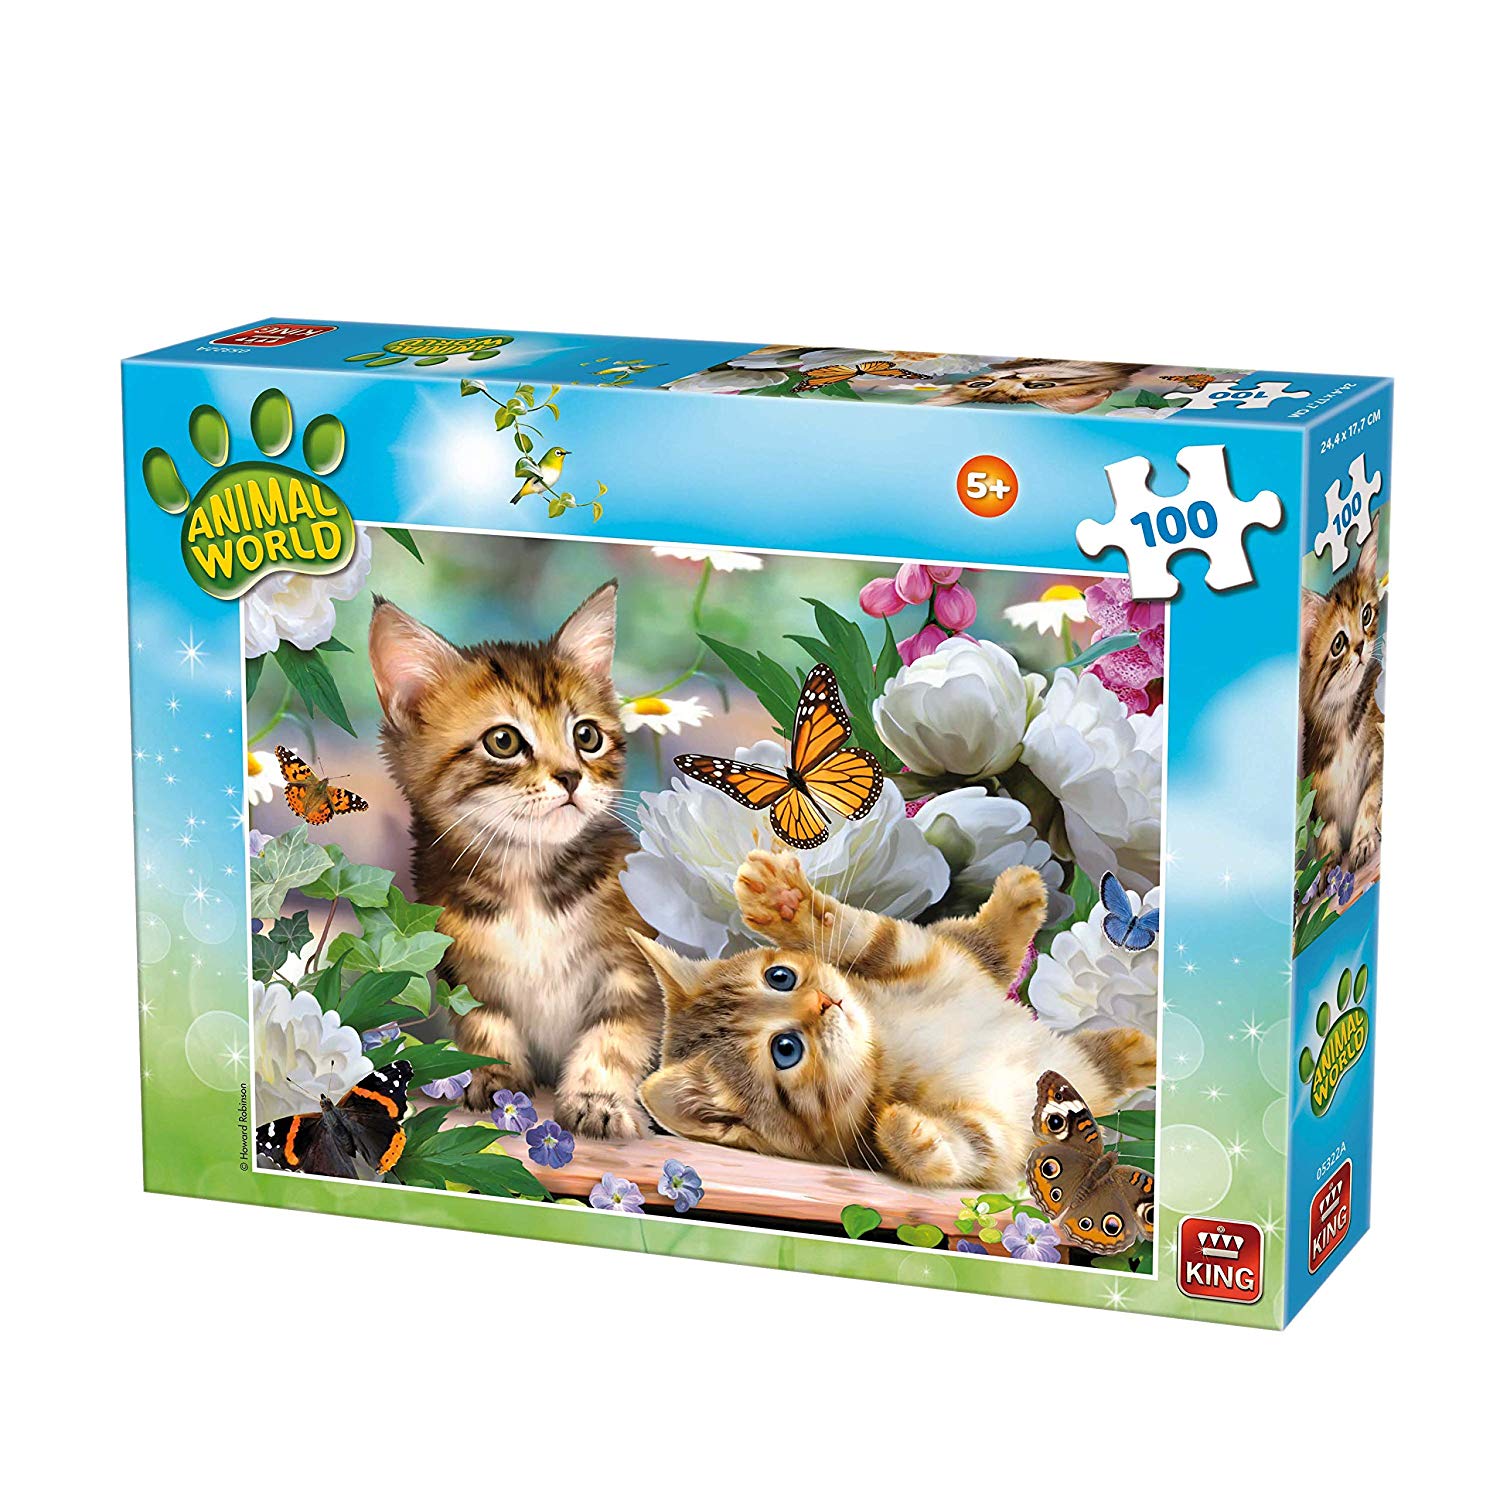 King Puzzle Animal World Jigsaw Puzzle 100 Pieces